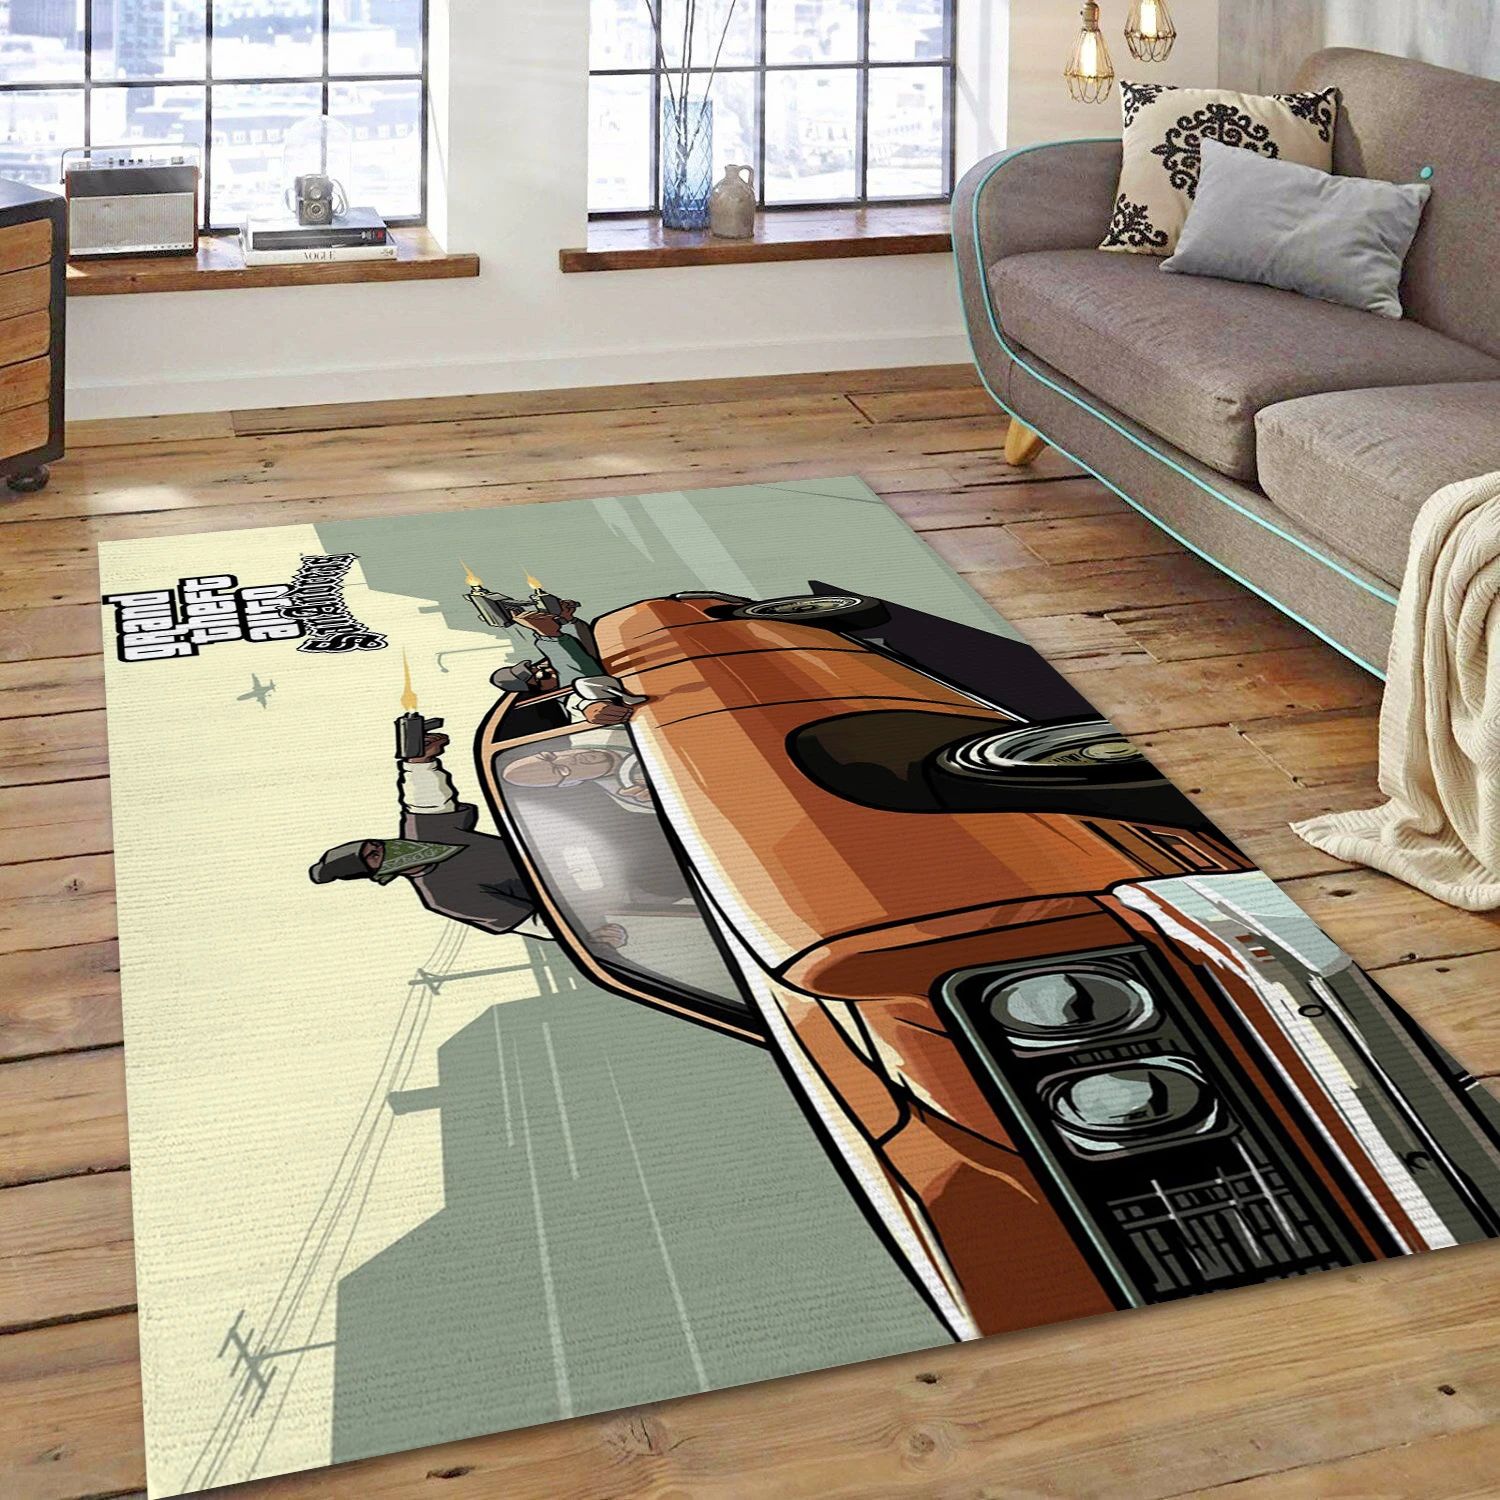 Grand Theft Auto San Andreas Video Game Area Rug Area, Area Rug - Christmas Gift Decor - Indoor Outdoor Rugs